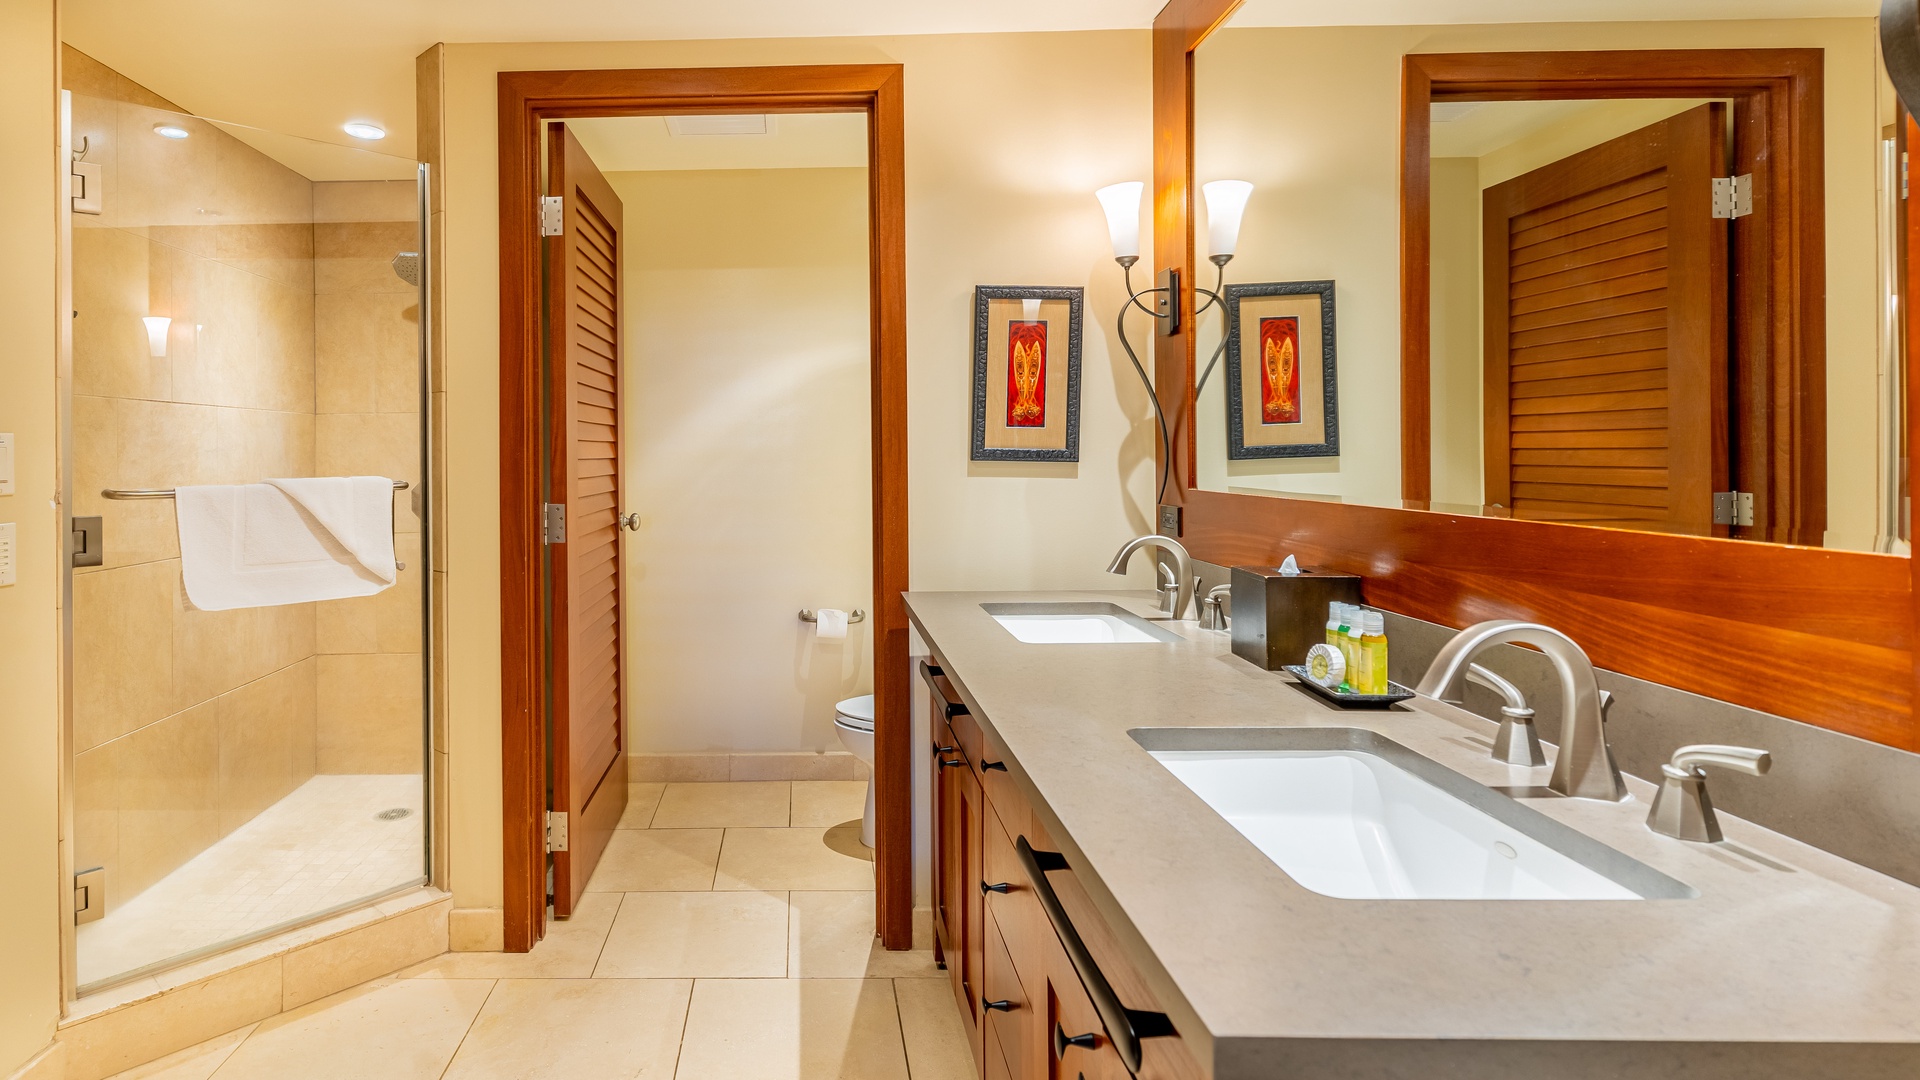 Kapolei Vacation Rentals, Ko Olina Beach Villas B102 - The primary guest bathroom with a shower and double vanity.